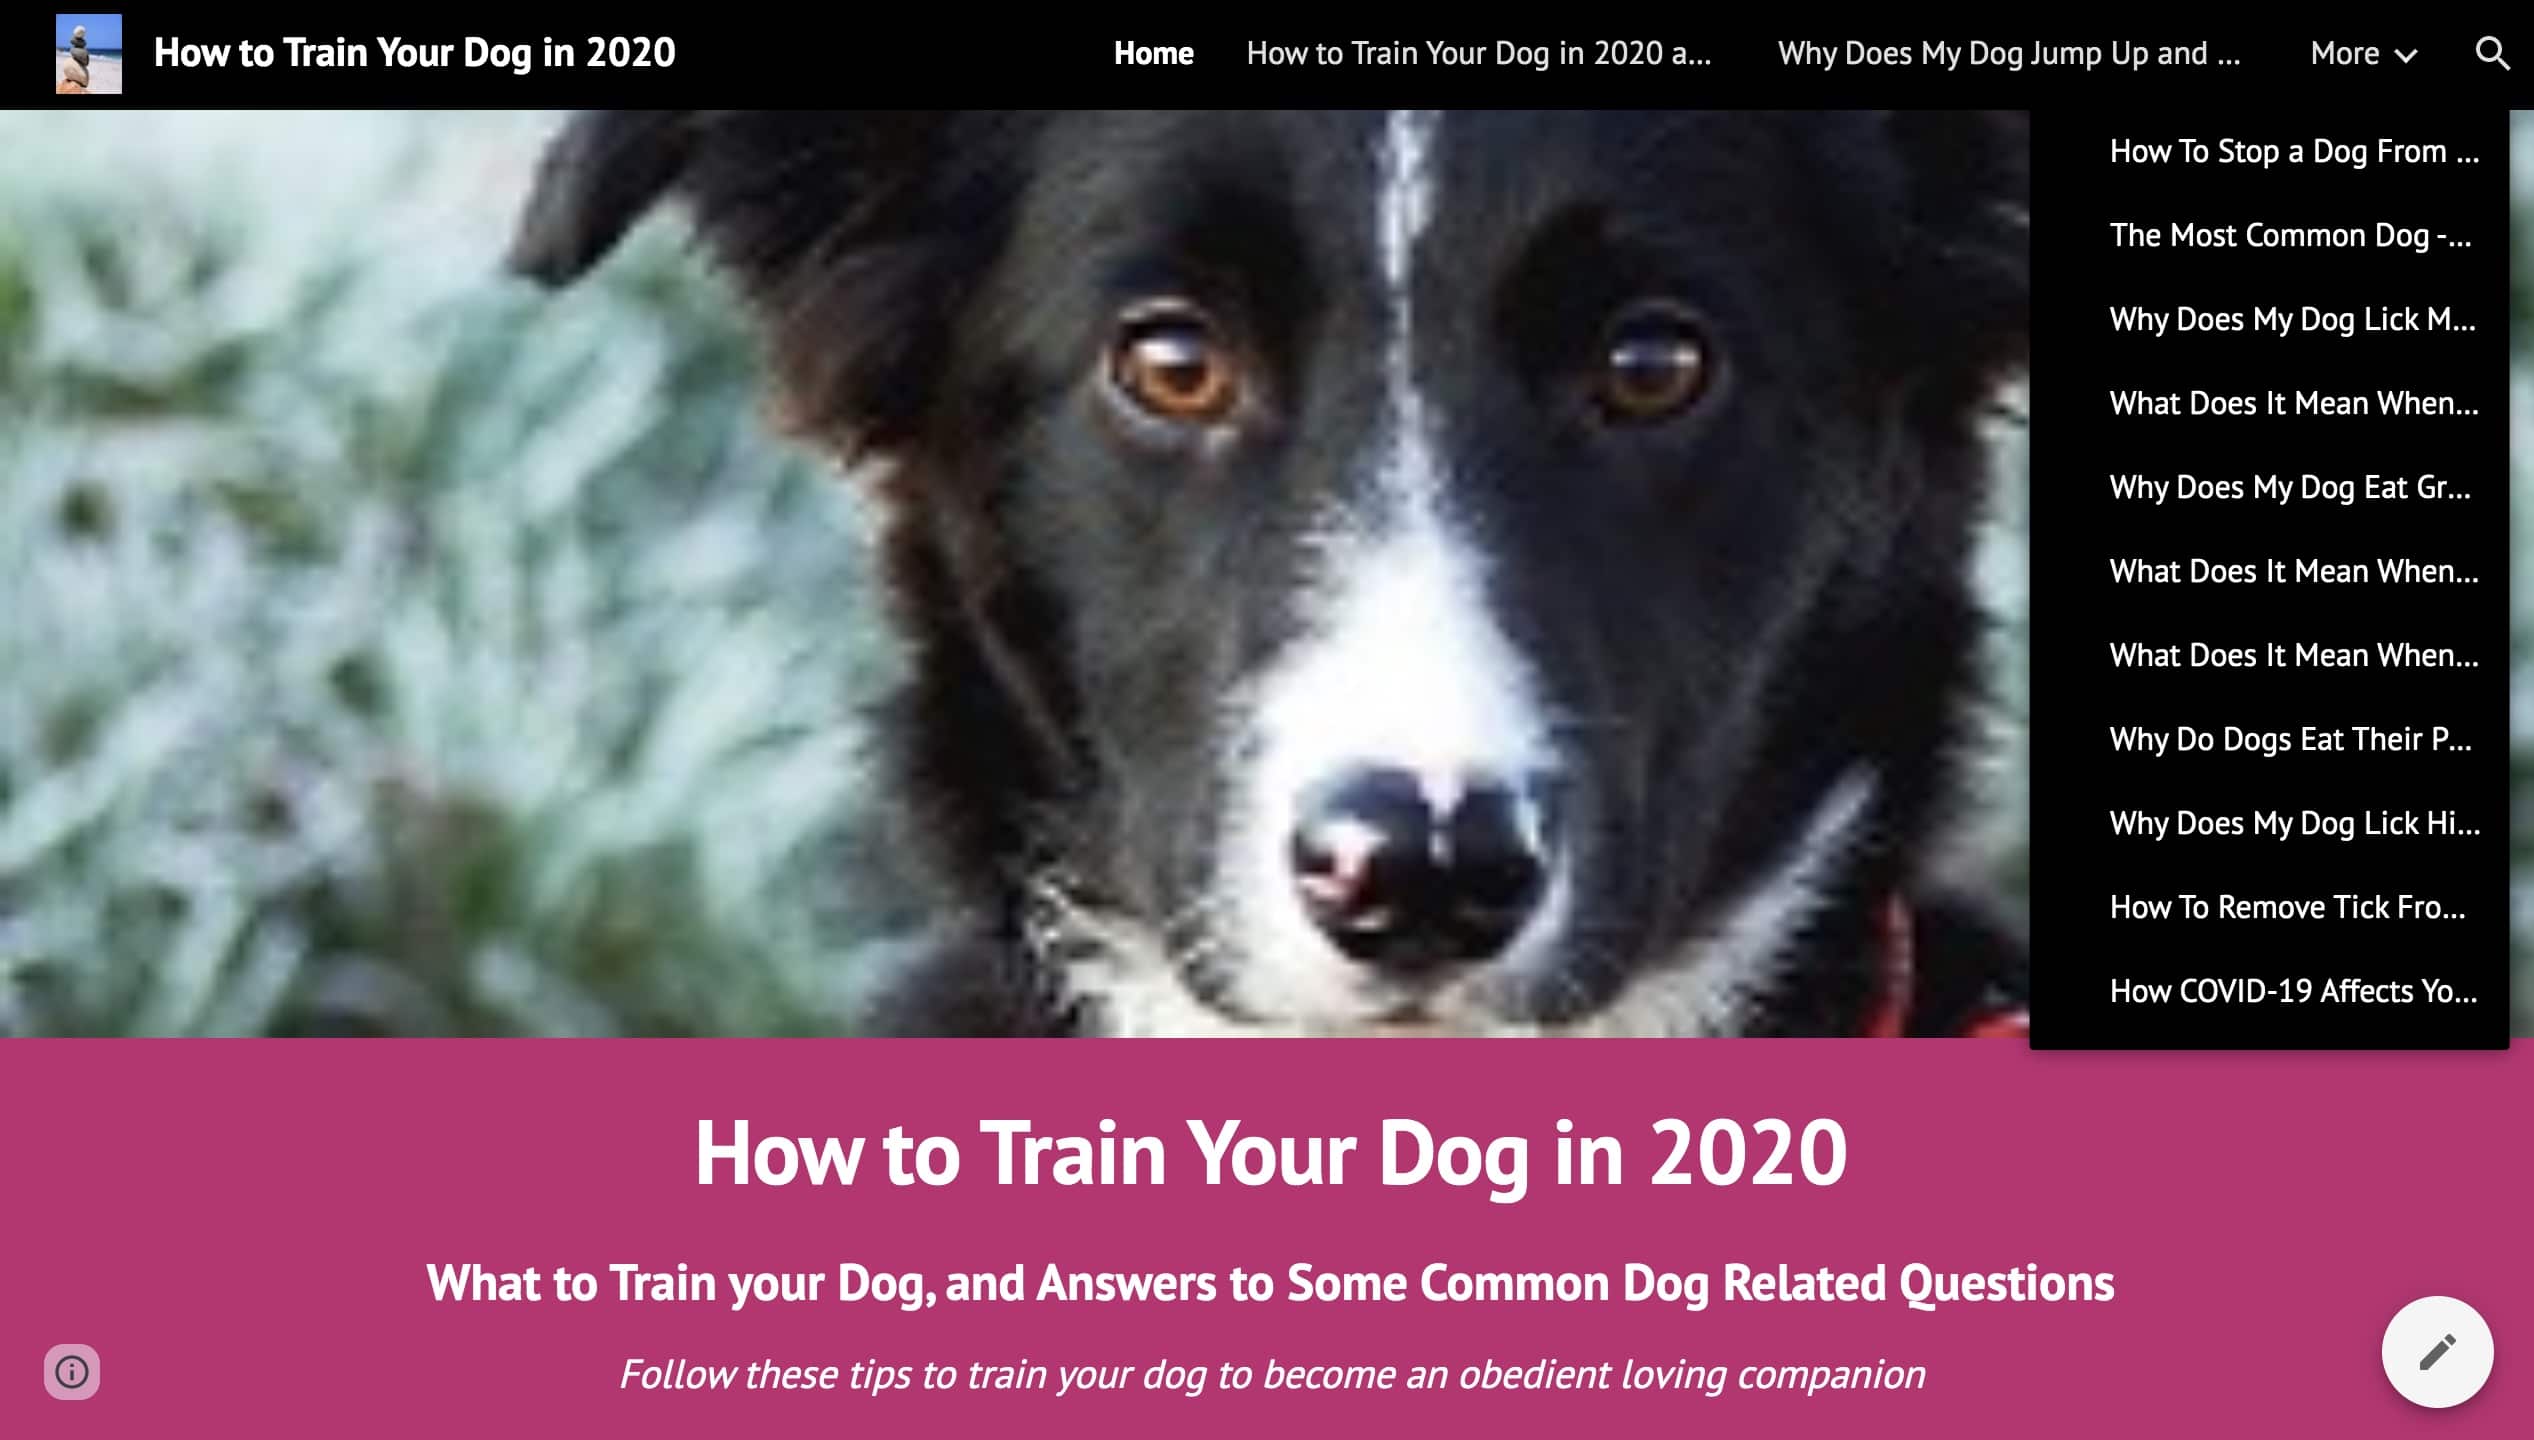 How to train Your Dog in 2020